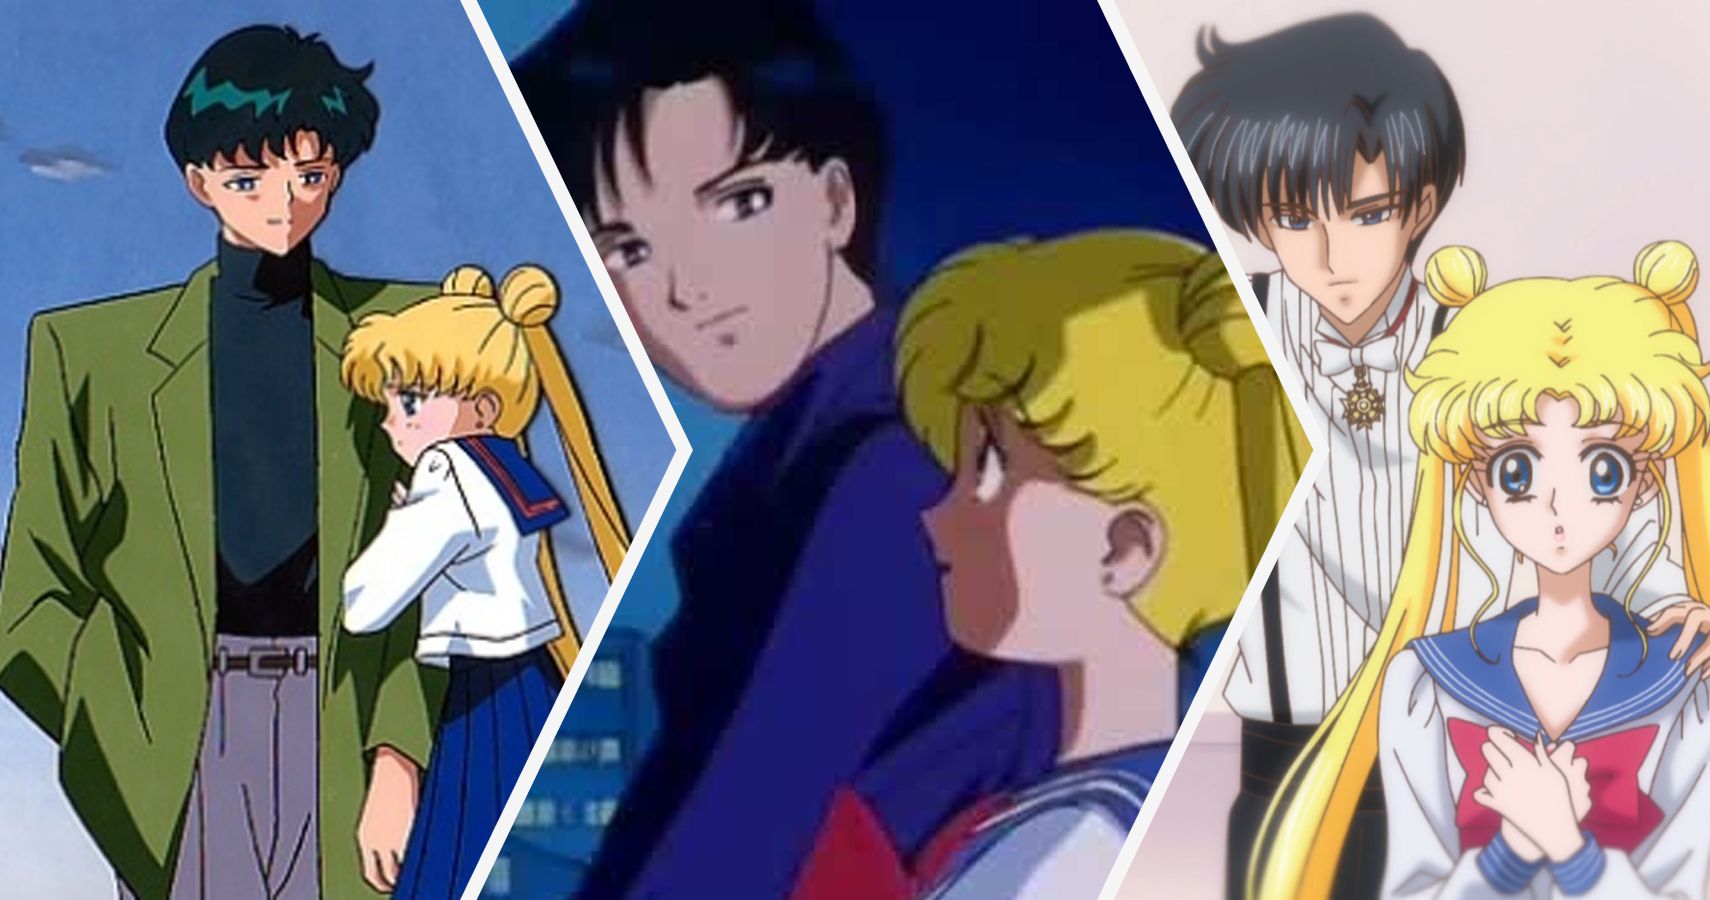 20 Strange Facts Only Real Fans Know About Sailor Moon And Tuxedo Mask 